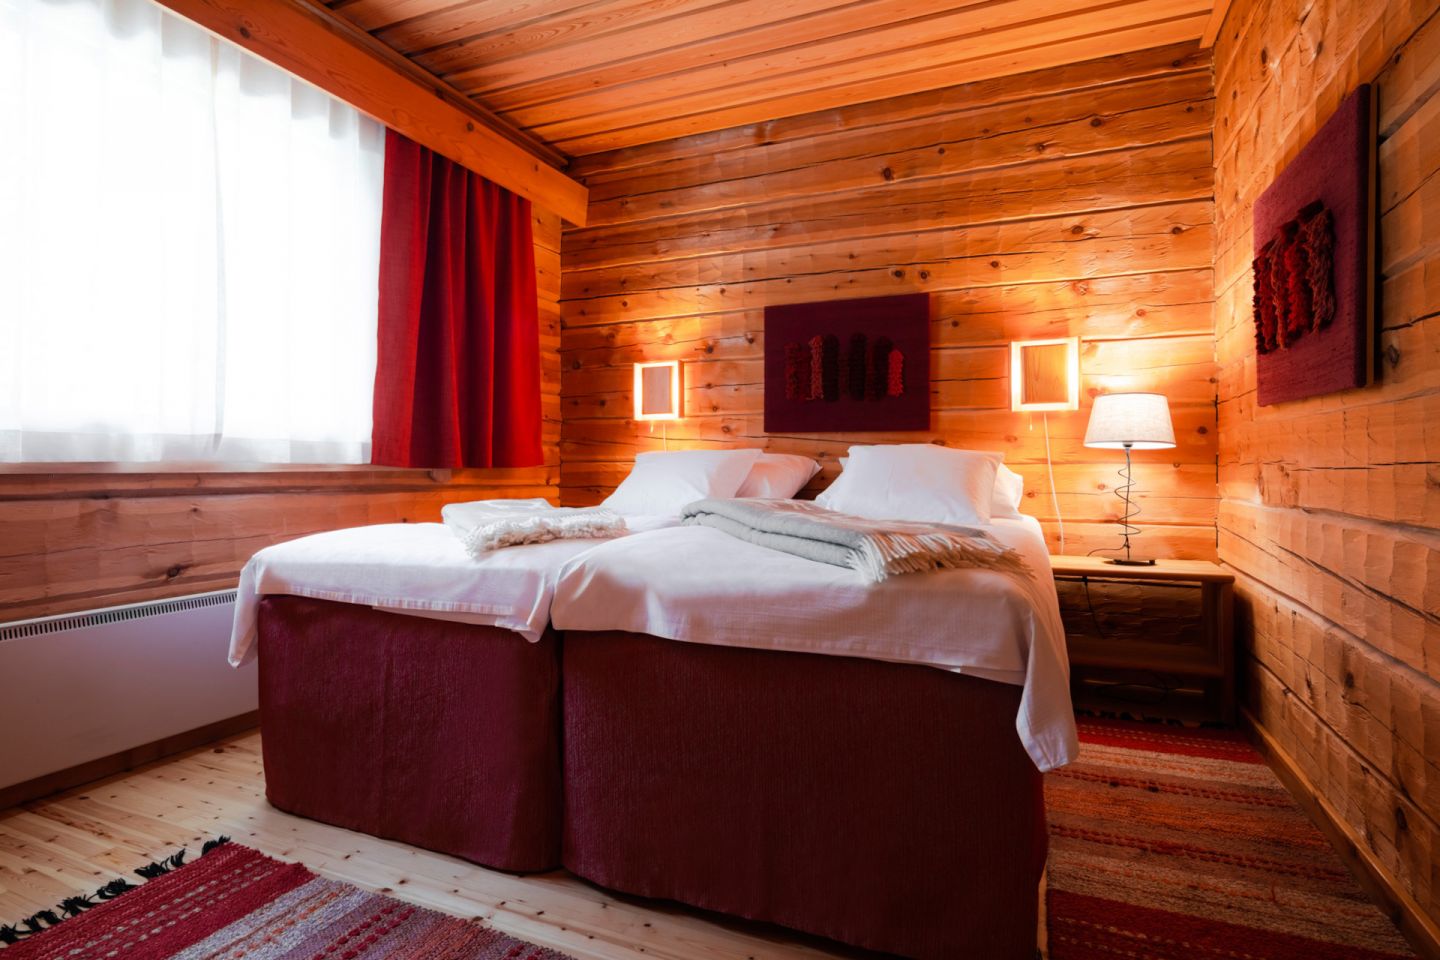 Sunday Morning Resort in Pyhä-Luosto, Finland, a special summer accommodation in Lapland